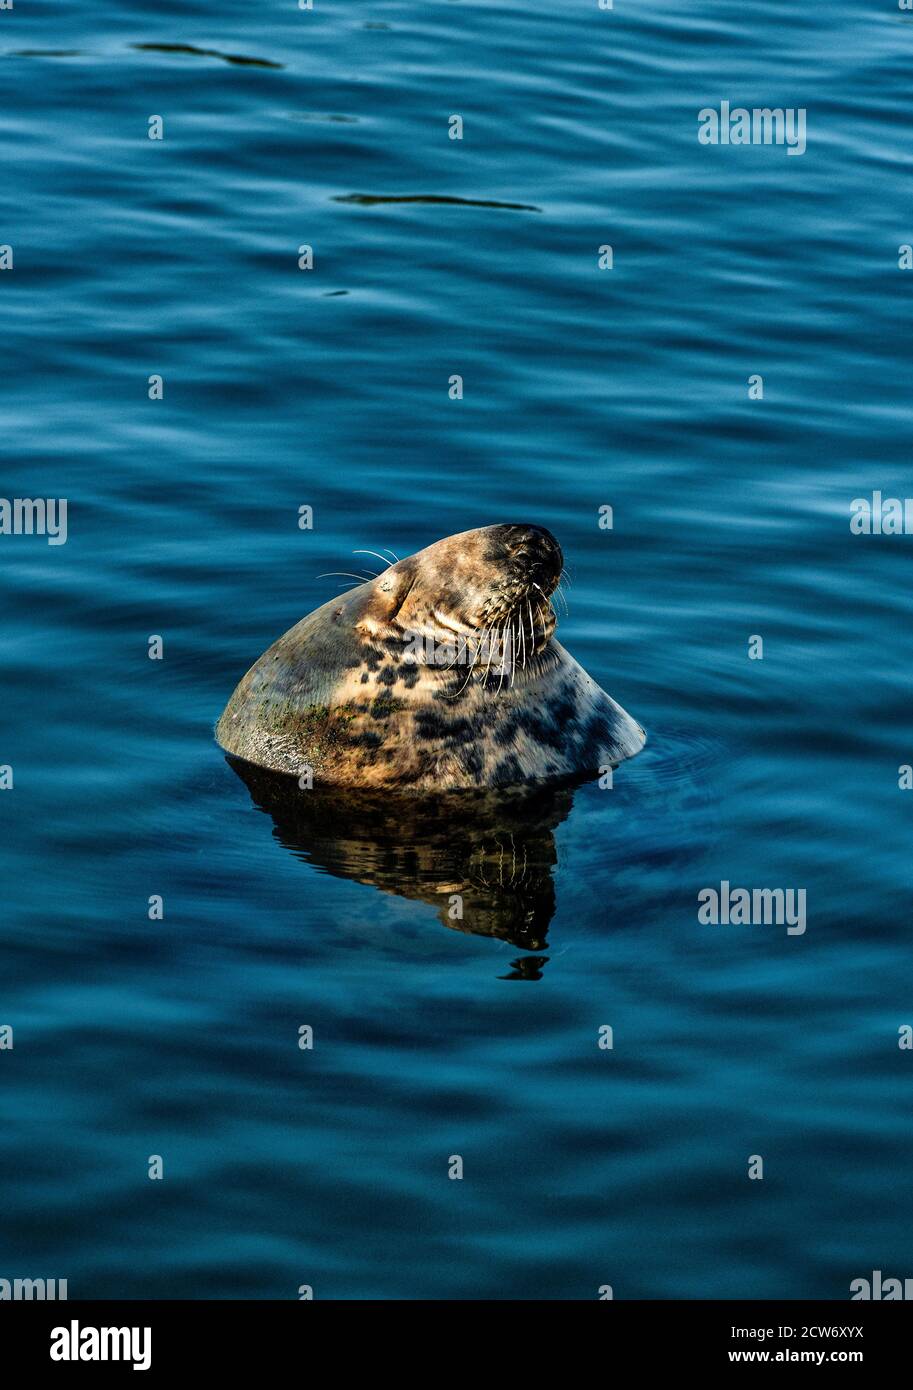 Harbour Seal Relaxing, Chatham, Cape Cod, Massachusetts, USA. Stockfoto